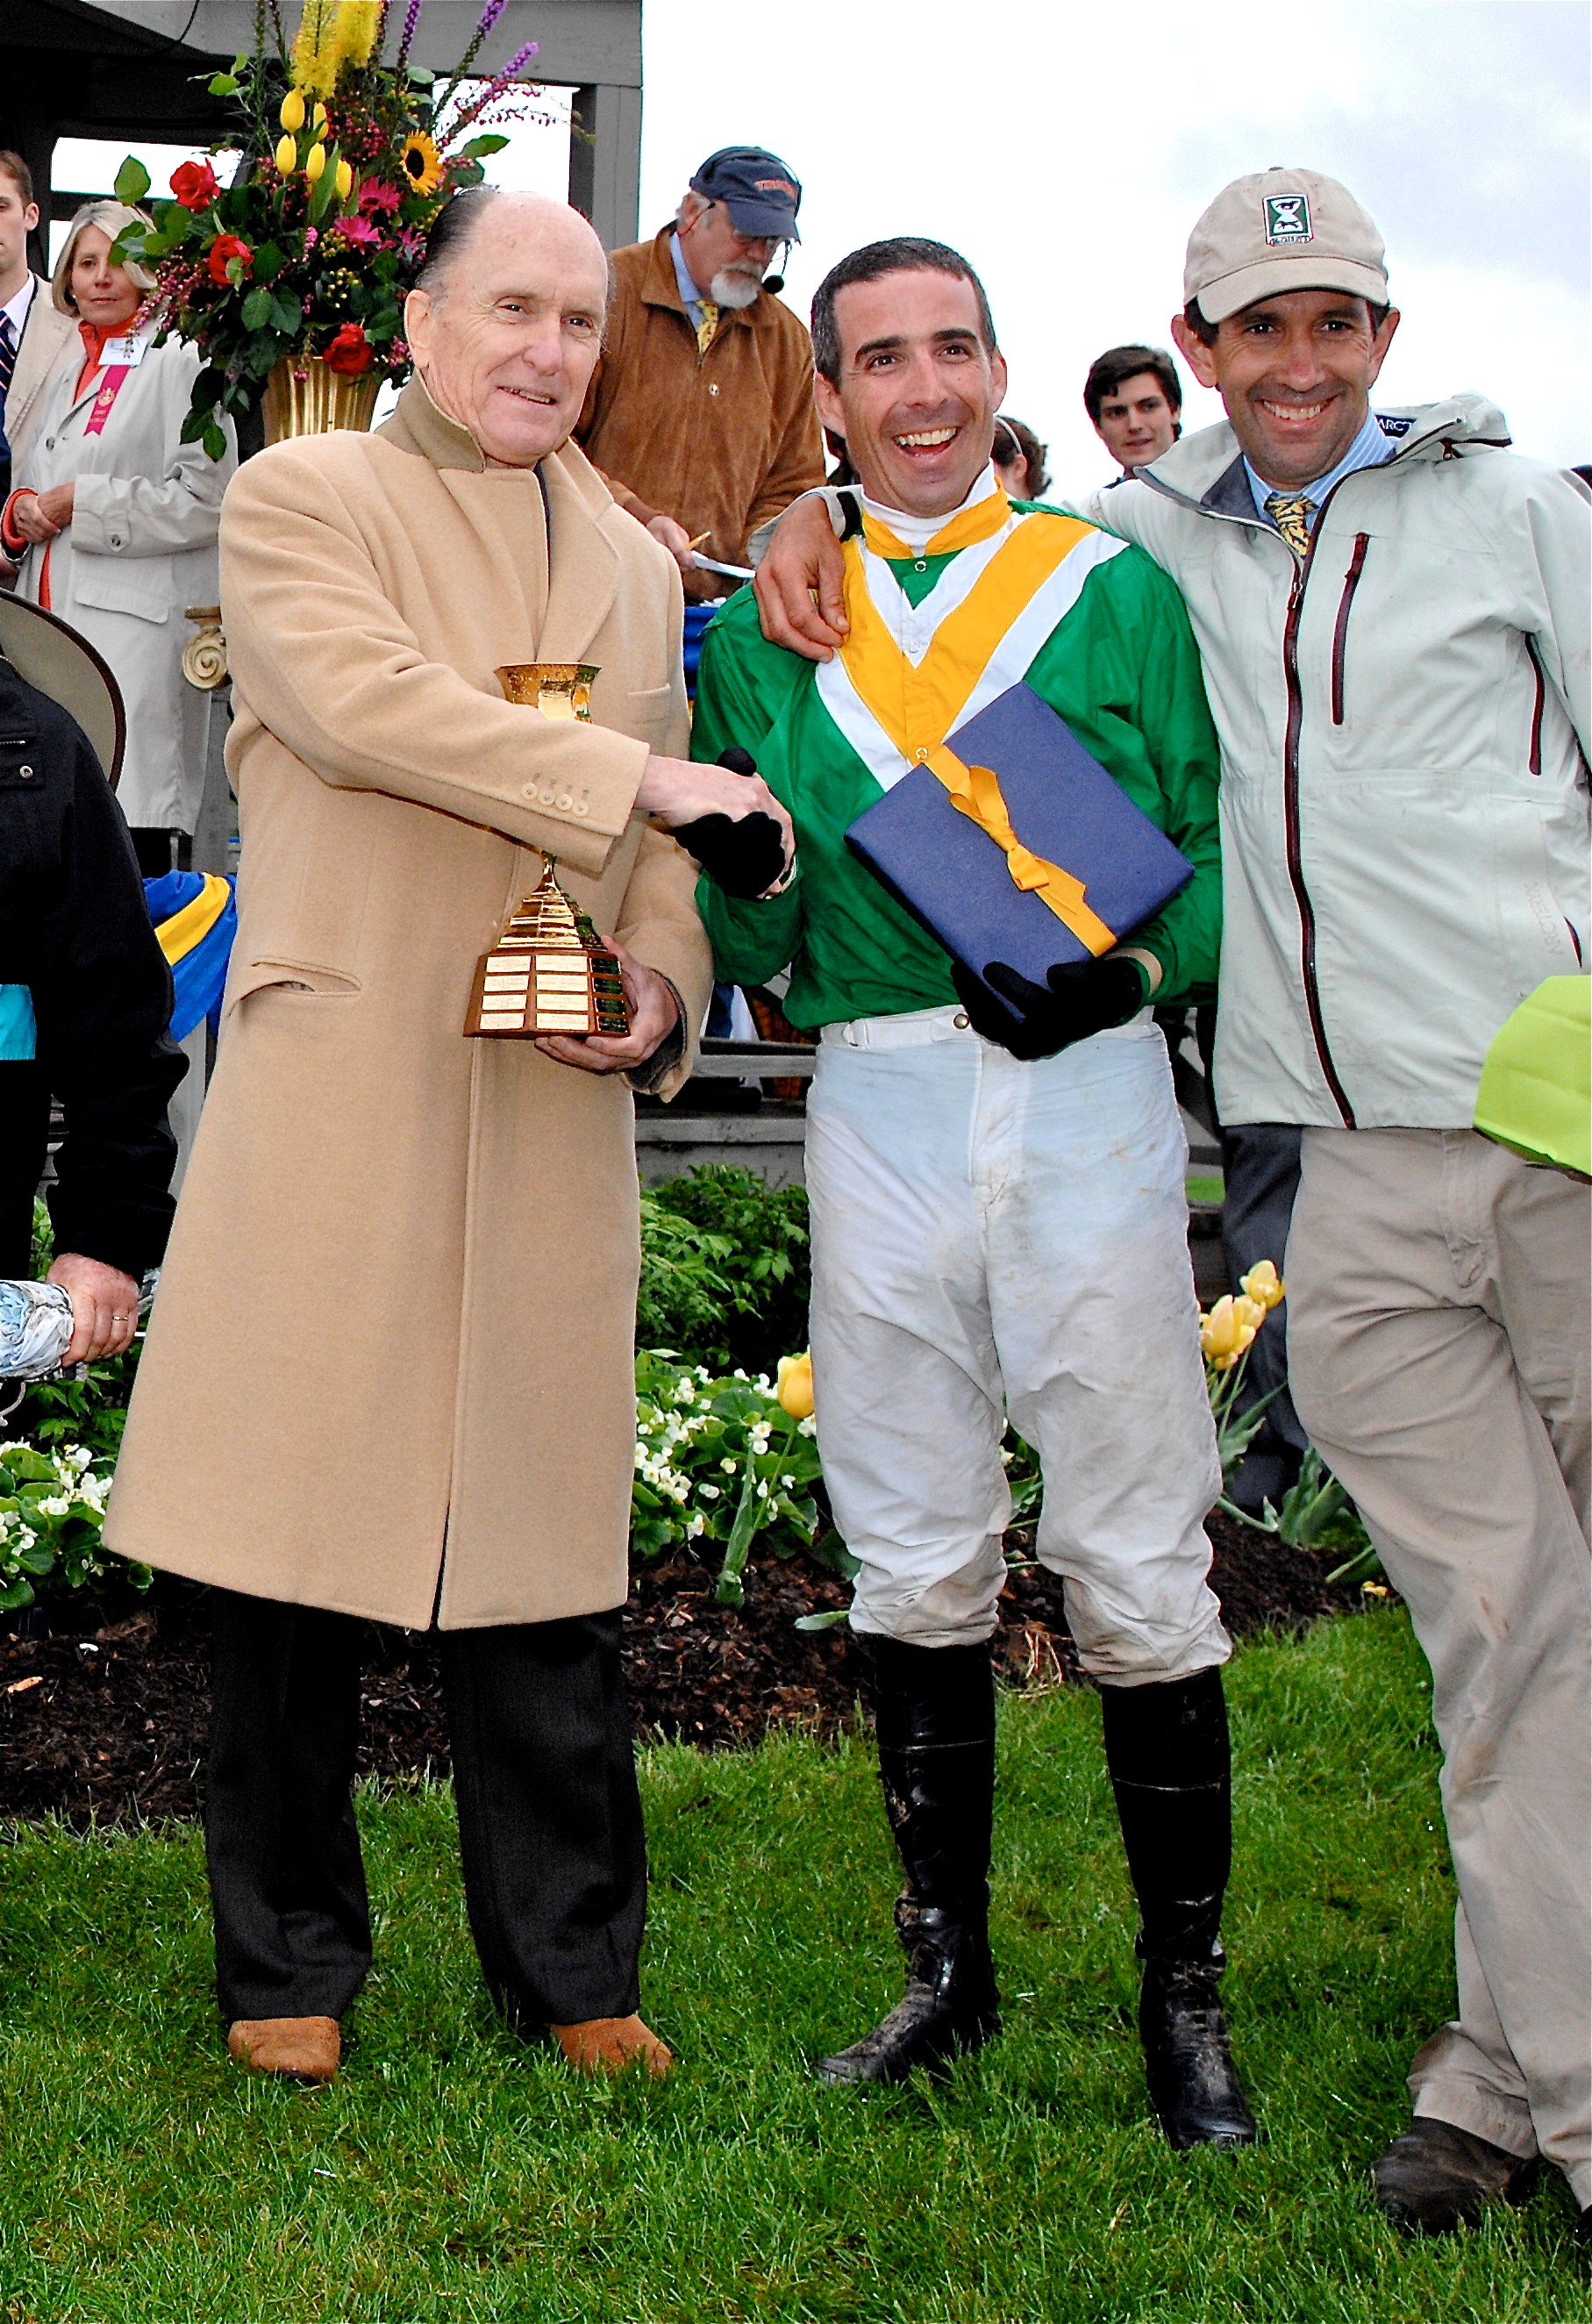 Robert Duvall, left, with Chip Miller, Middle, and Jack Fisher, right, at the 2007 Virginia Gold Cup (Douglas Lees)